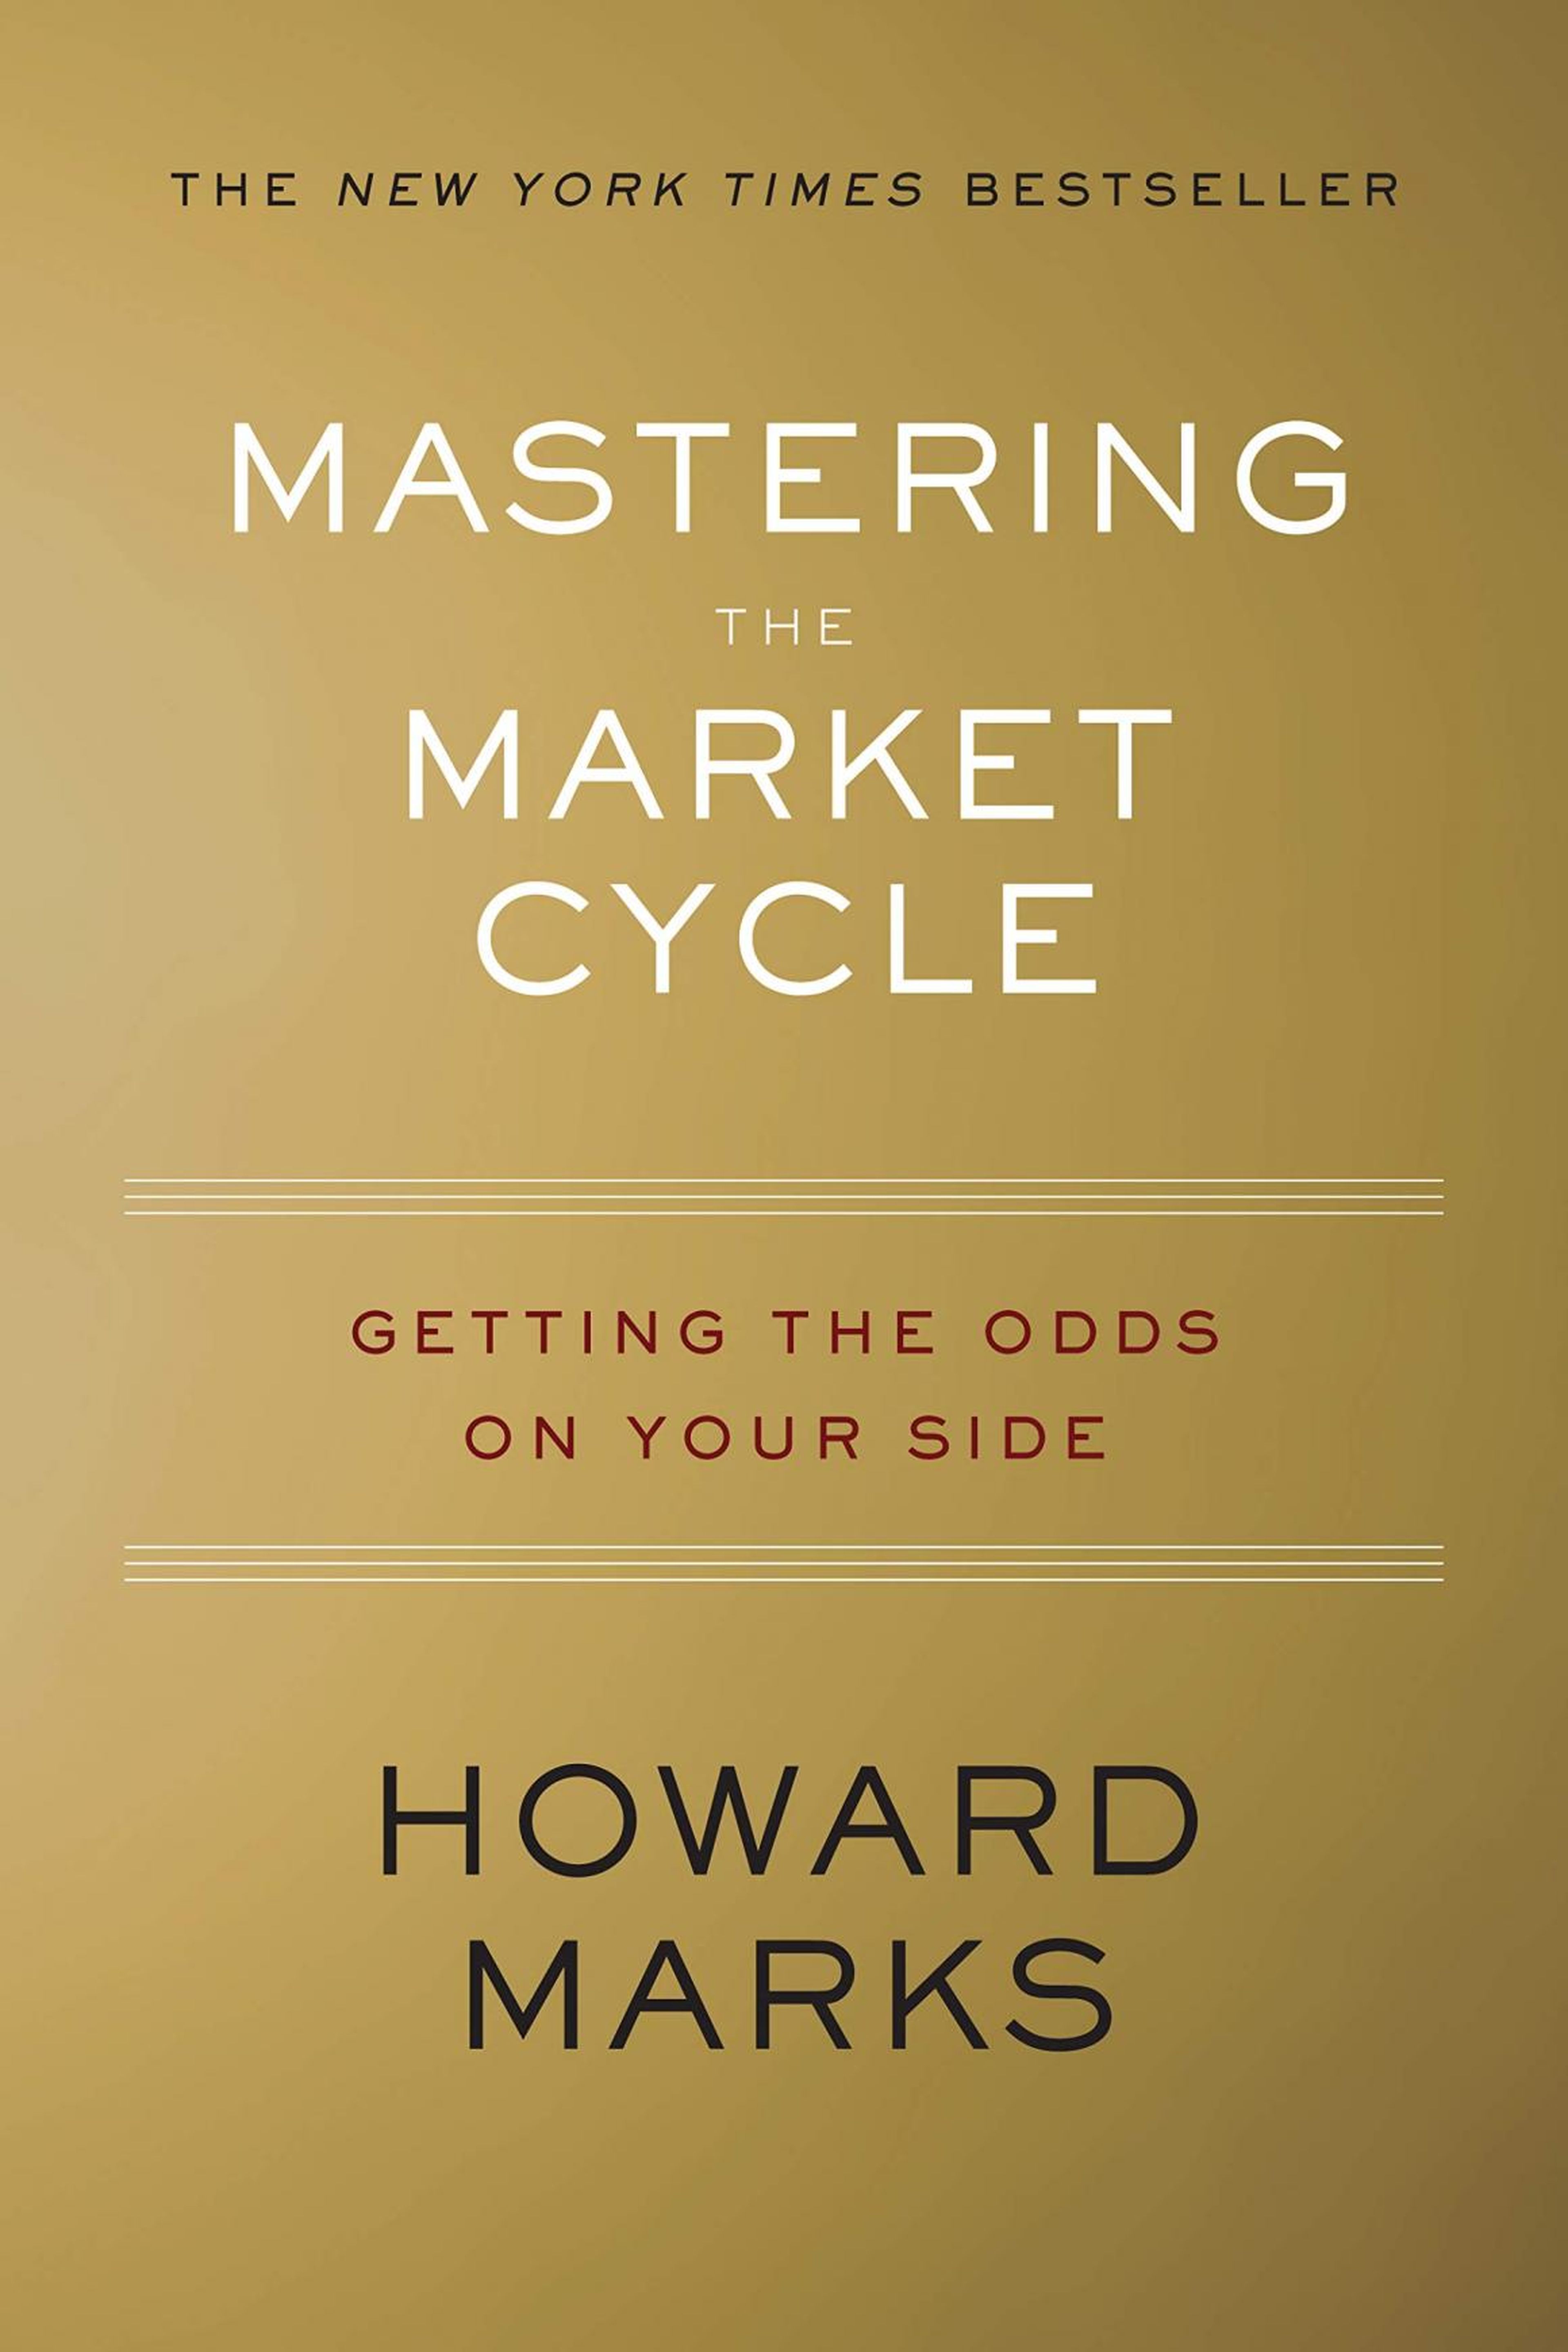 "Mastering the Market Cycle" by Howard Marks